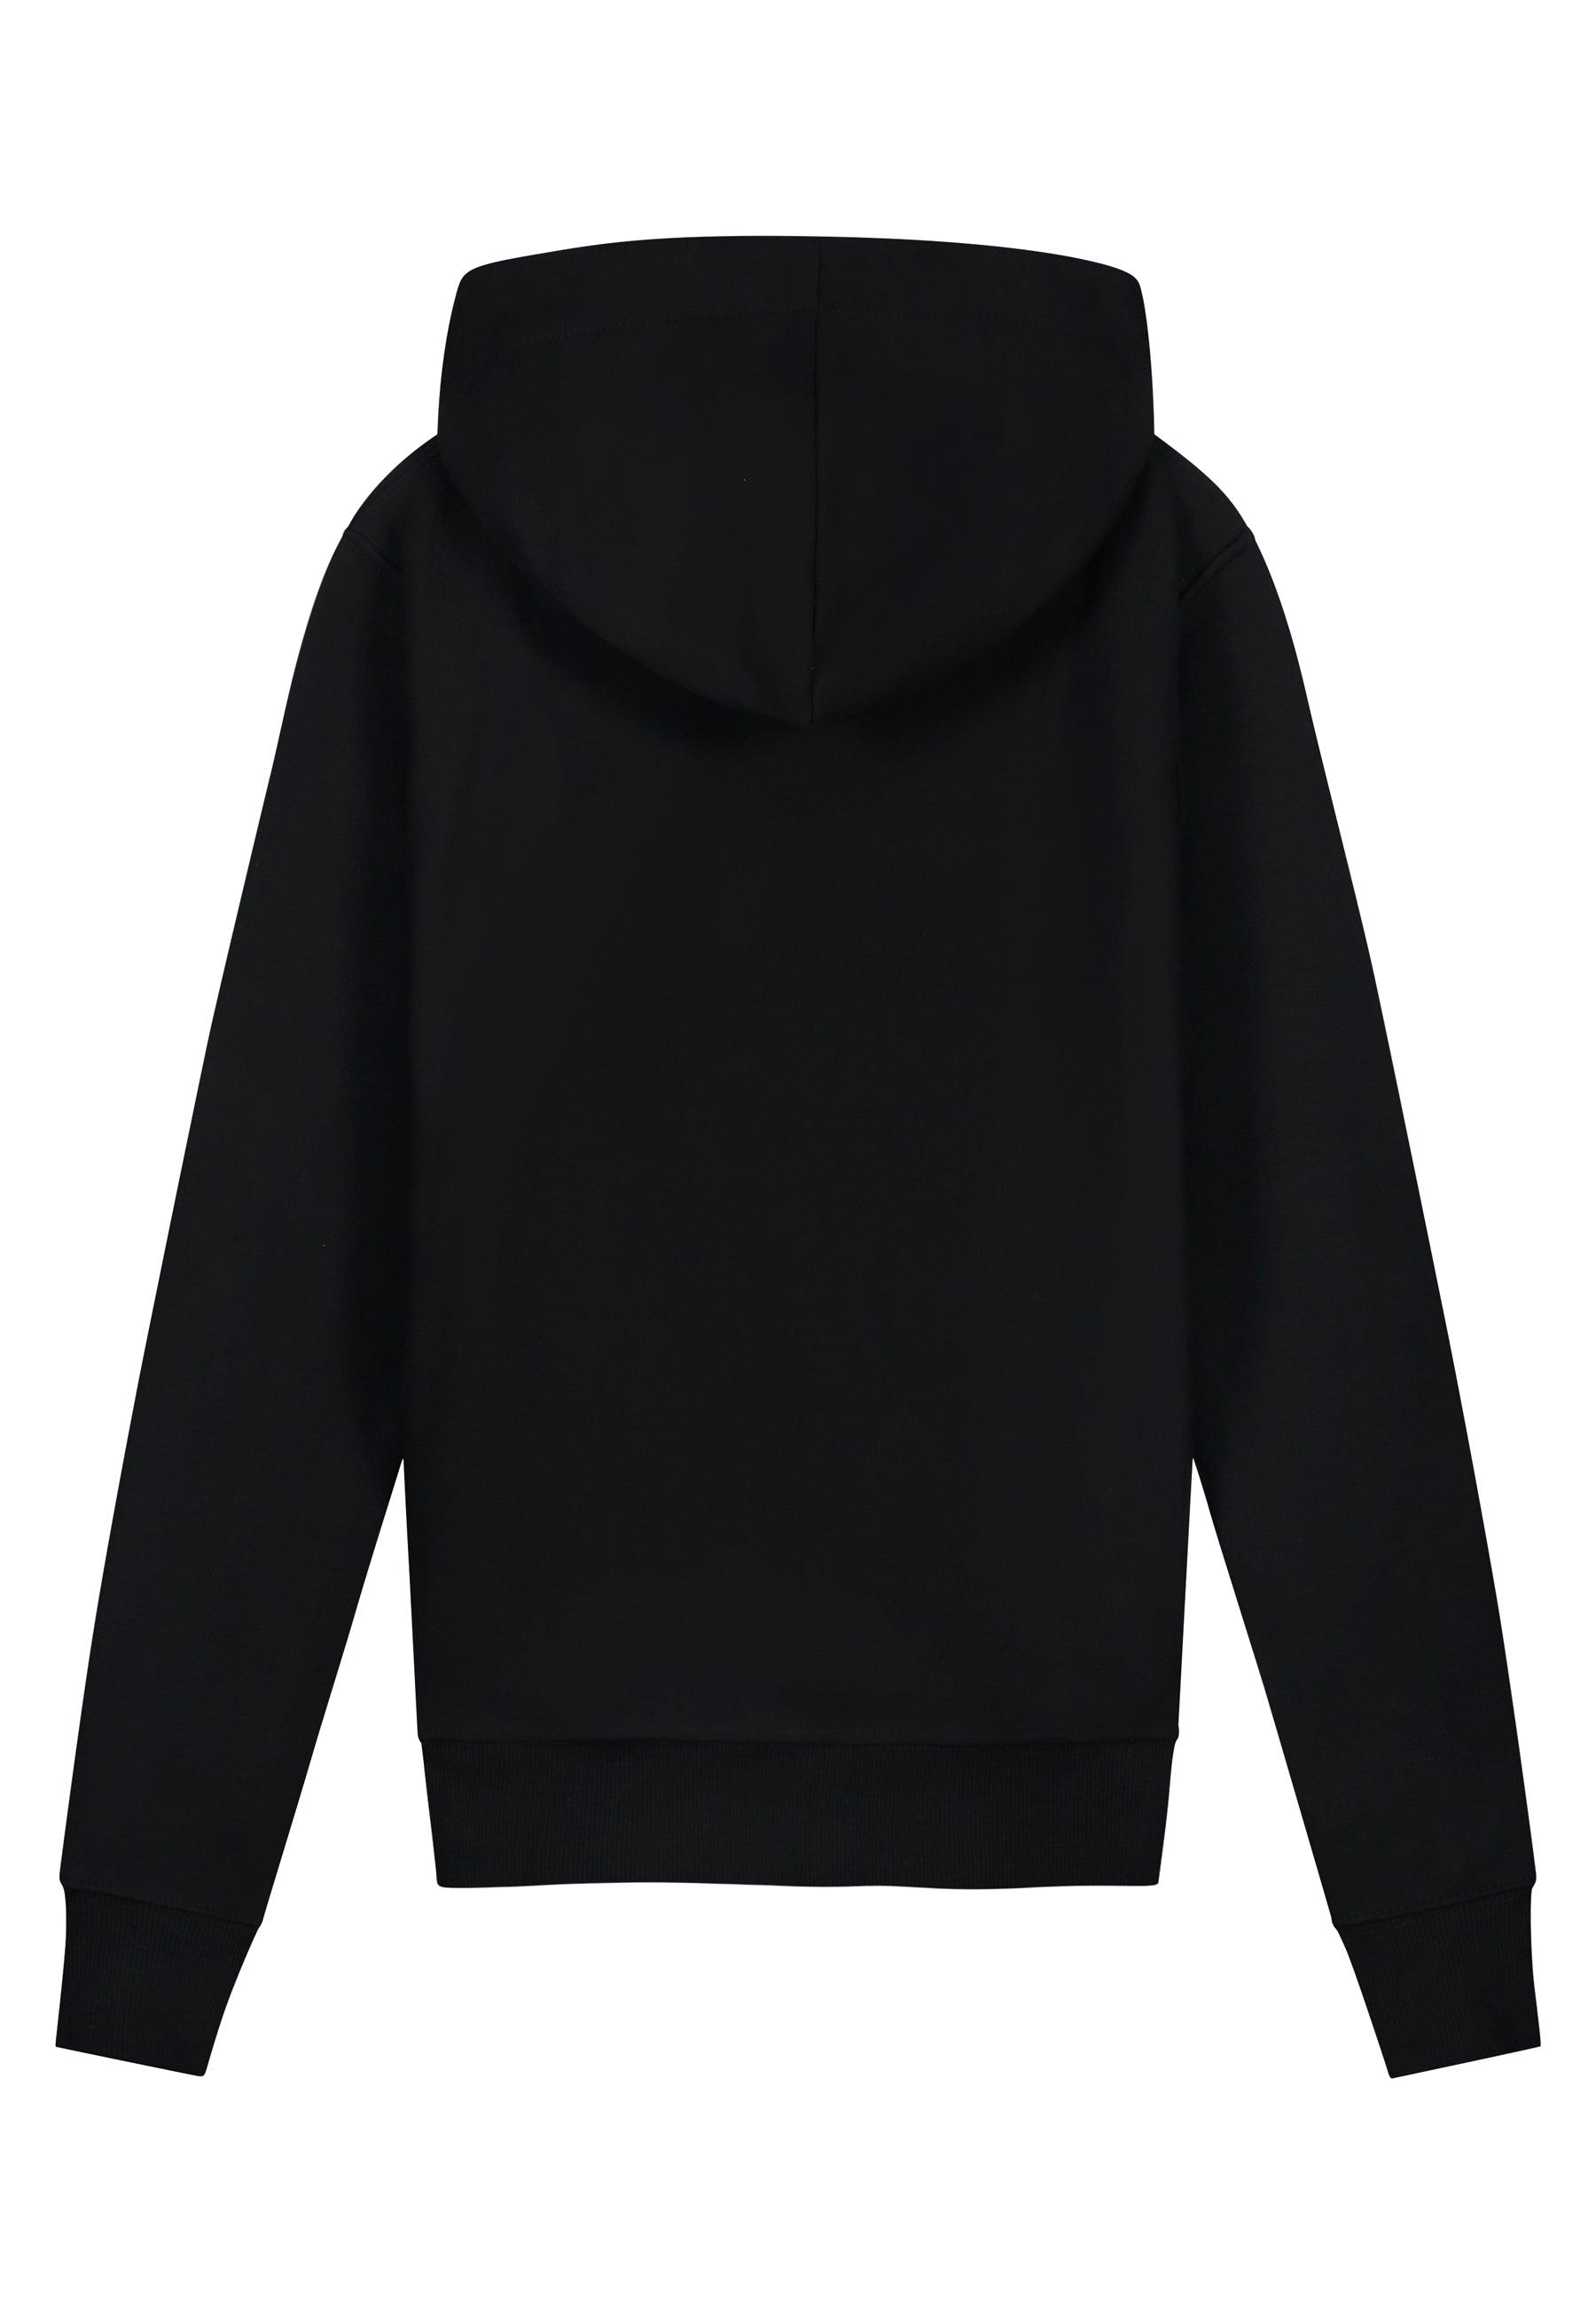 Artwork Black The – Collect Amsterdam hoodie Label